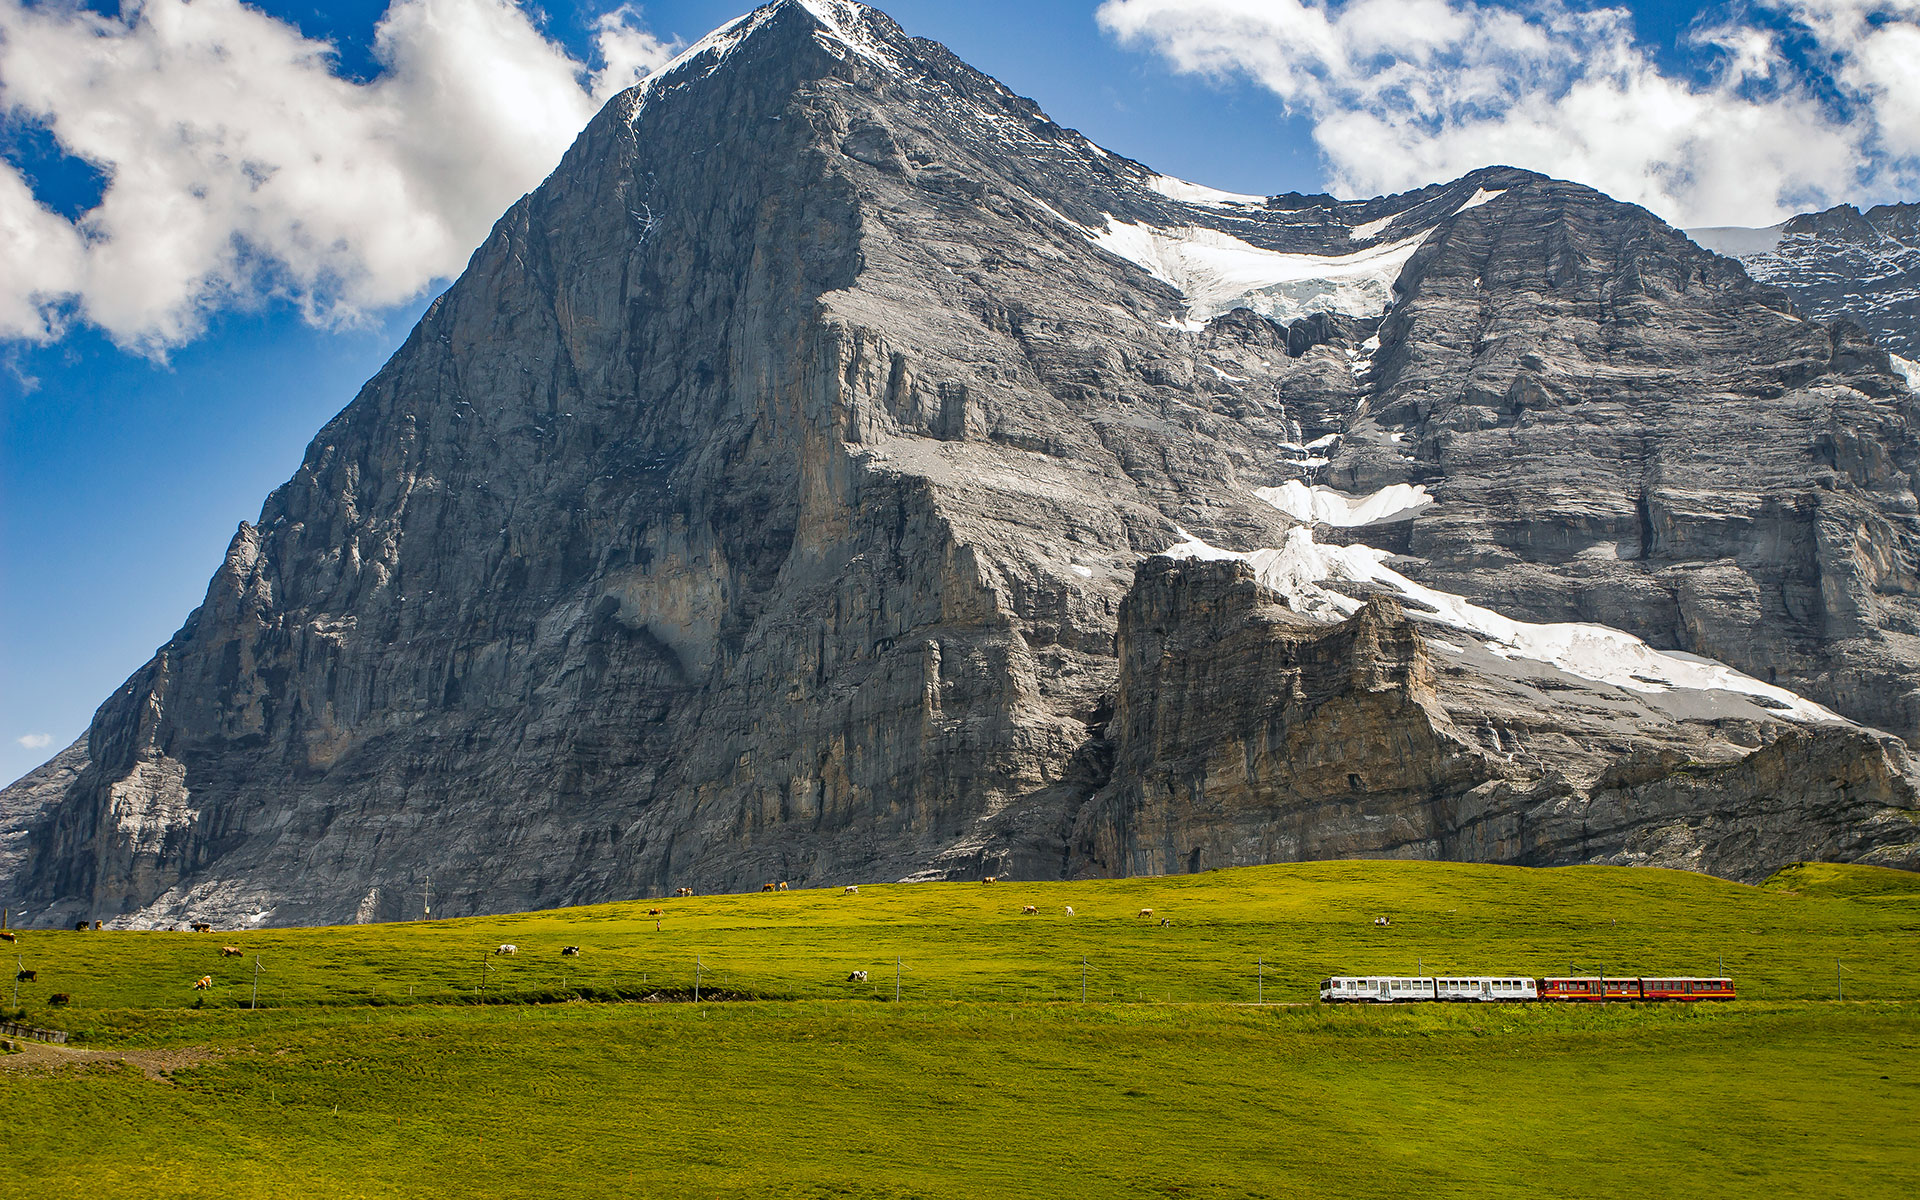 The North Face of the Eiger in the Swiss Alps (photo © Steven van Aerschot / dreamstime . com).